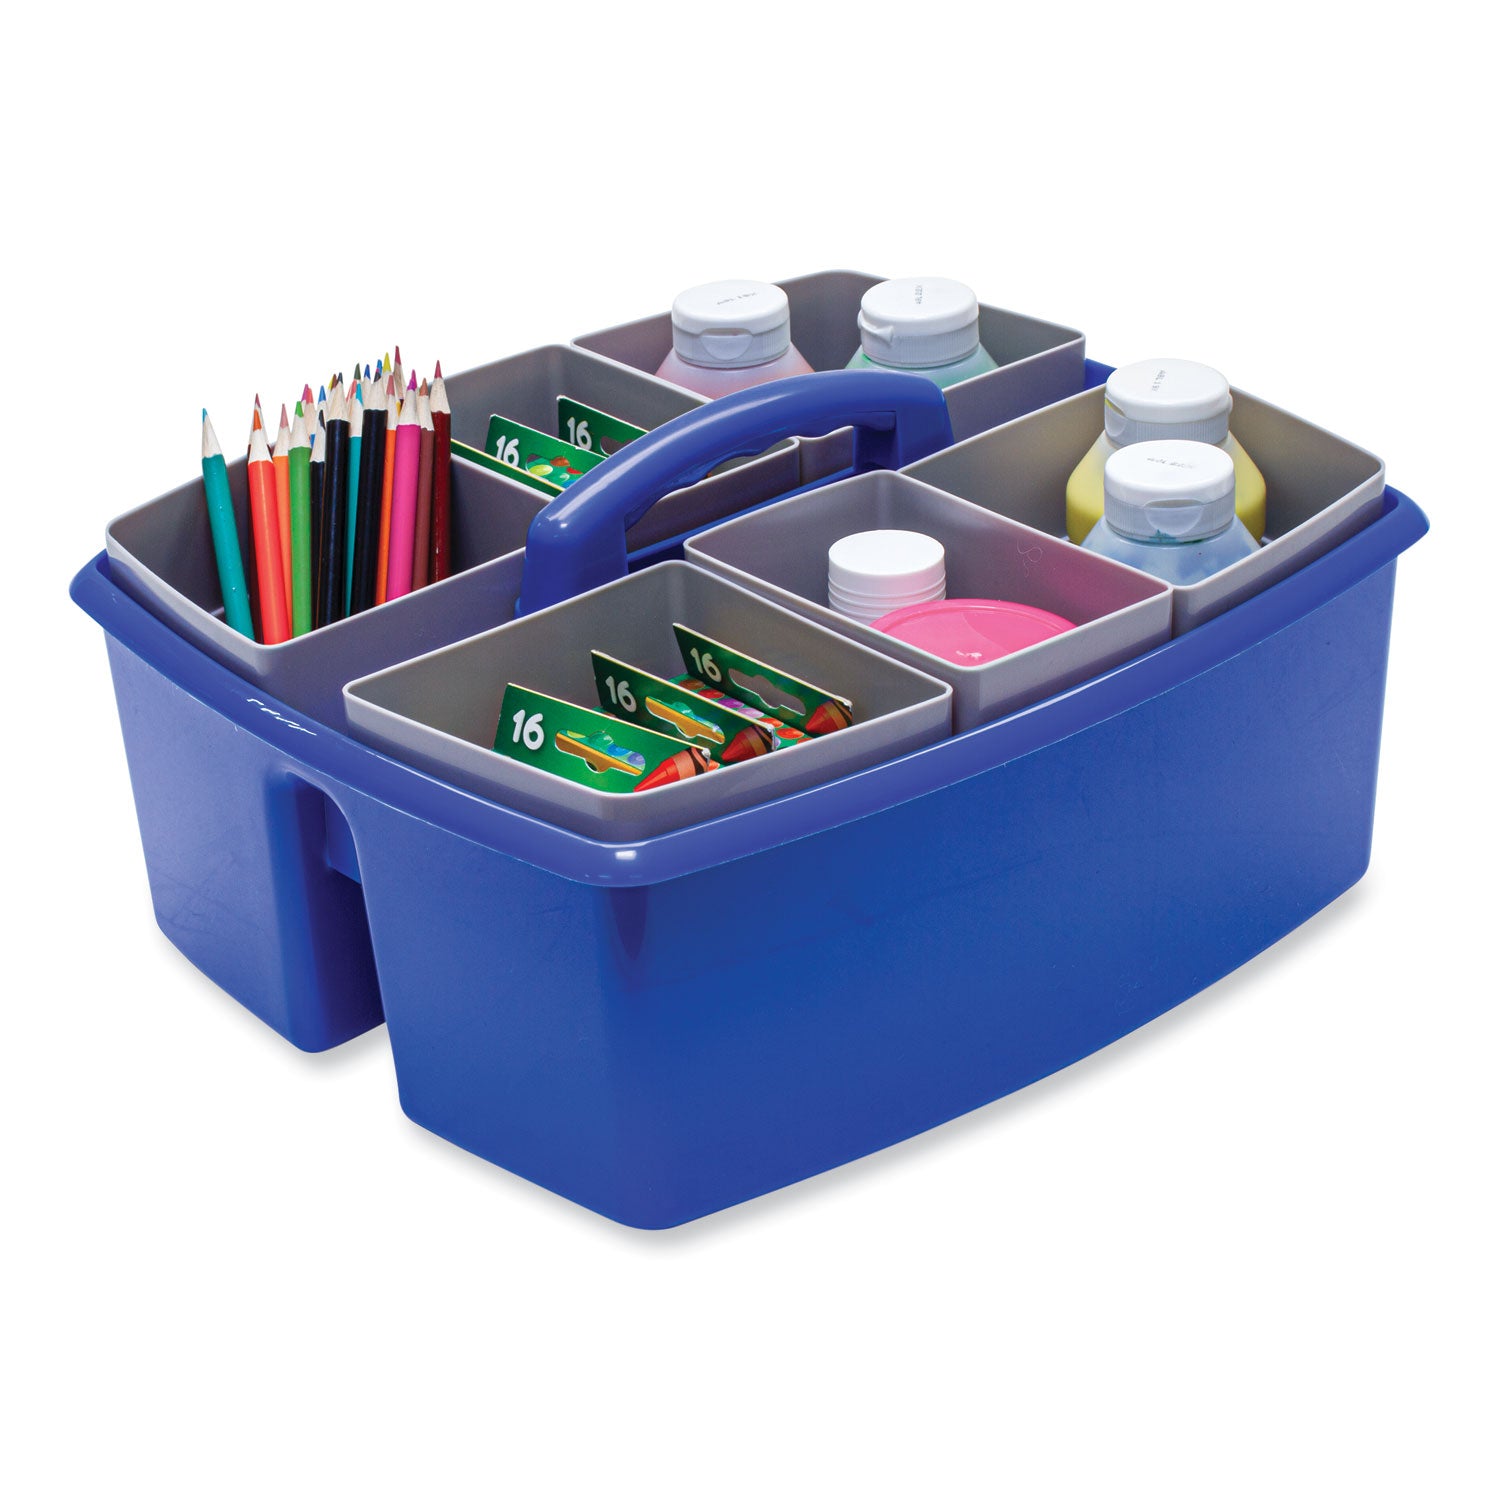 large-caddy-with-sorting-cups-blue-2-carton_stx00985u02c - 5